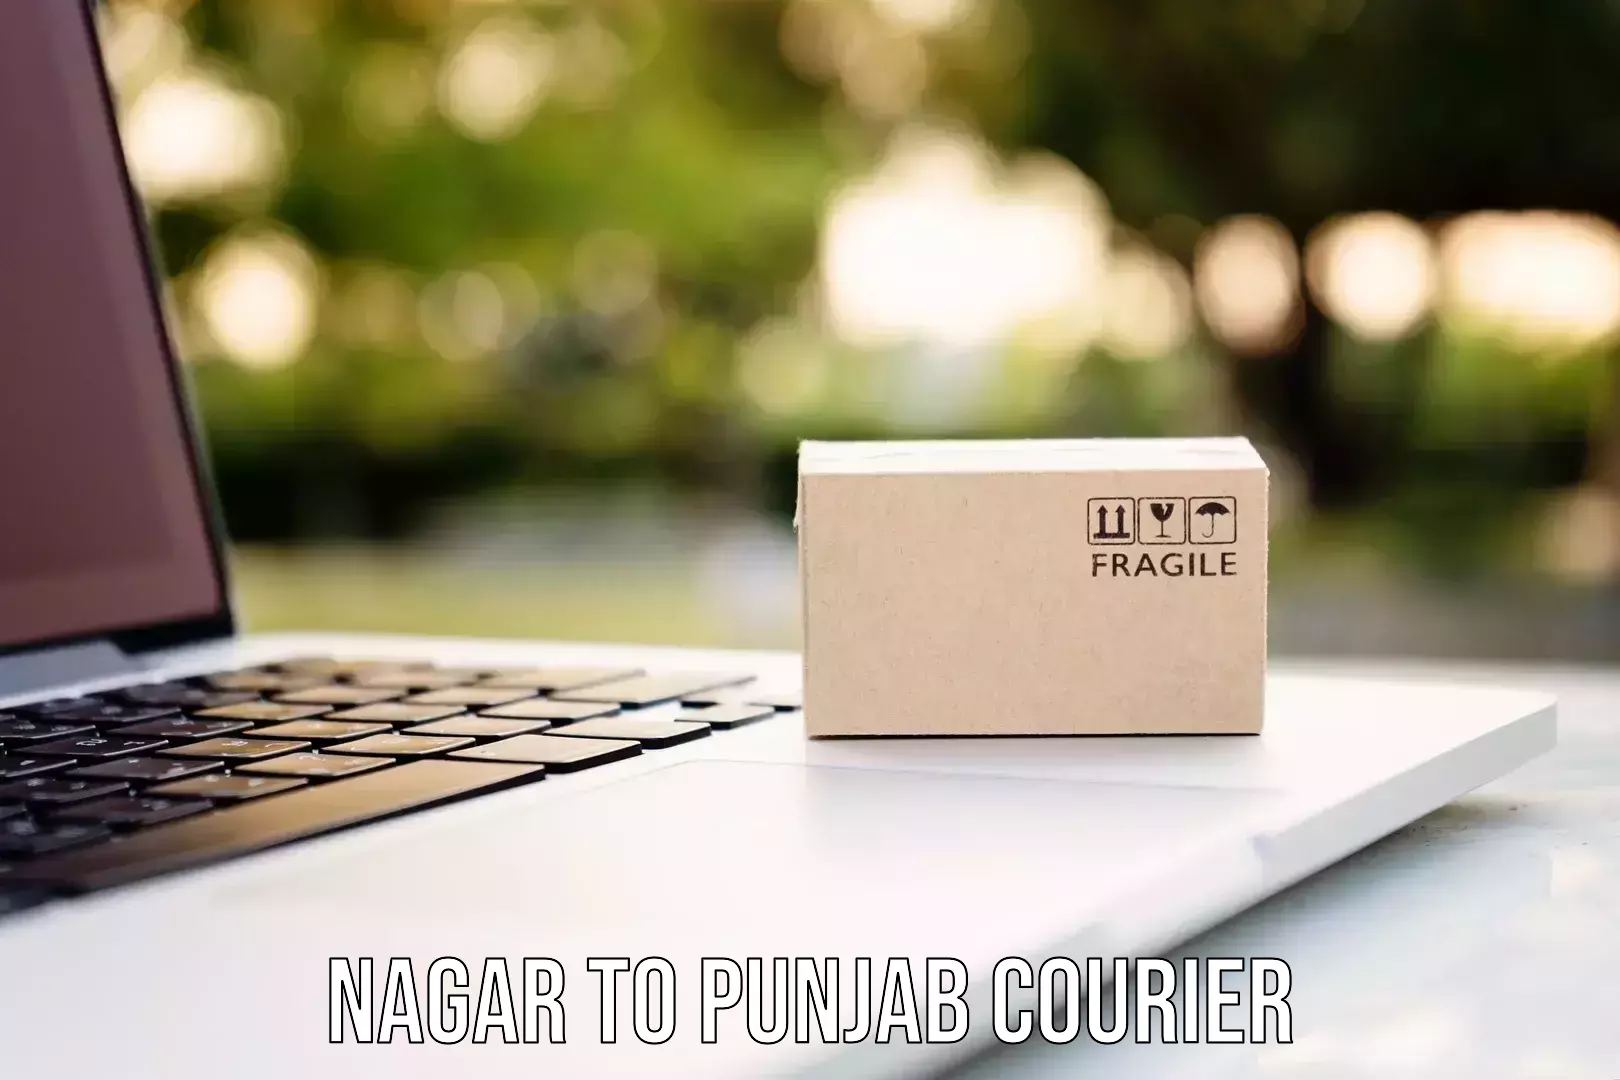 Professional courier services Nagar to Punjab